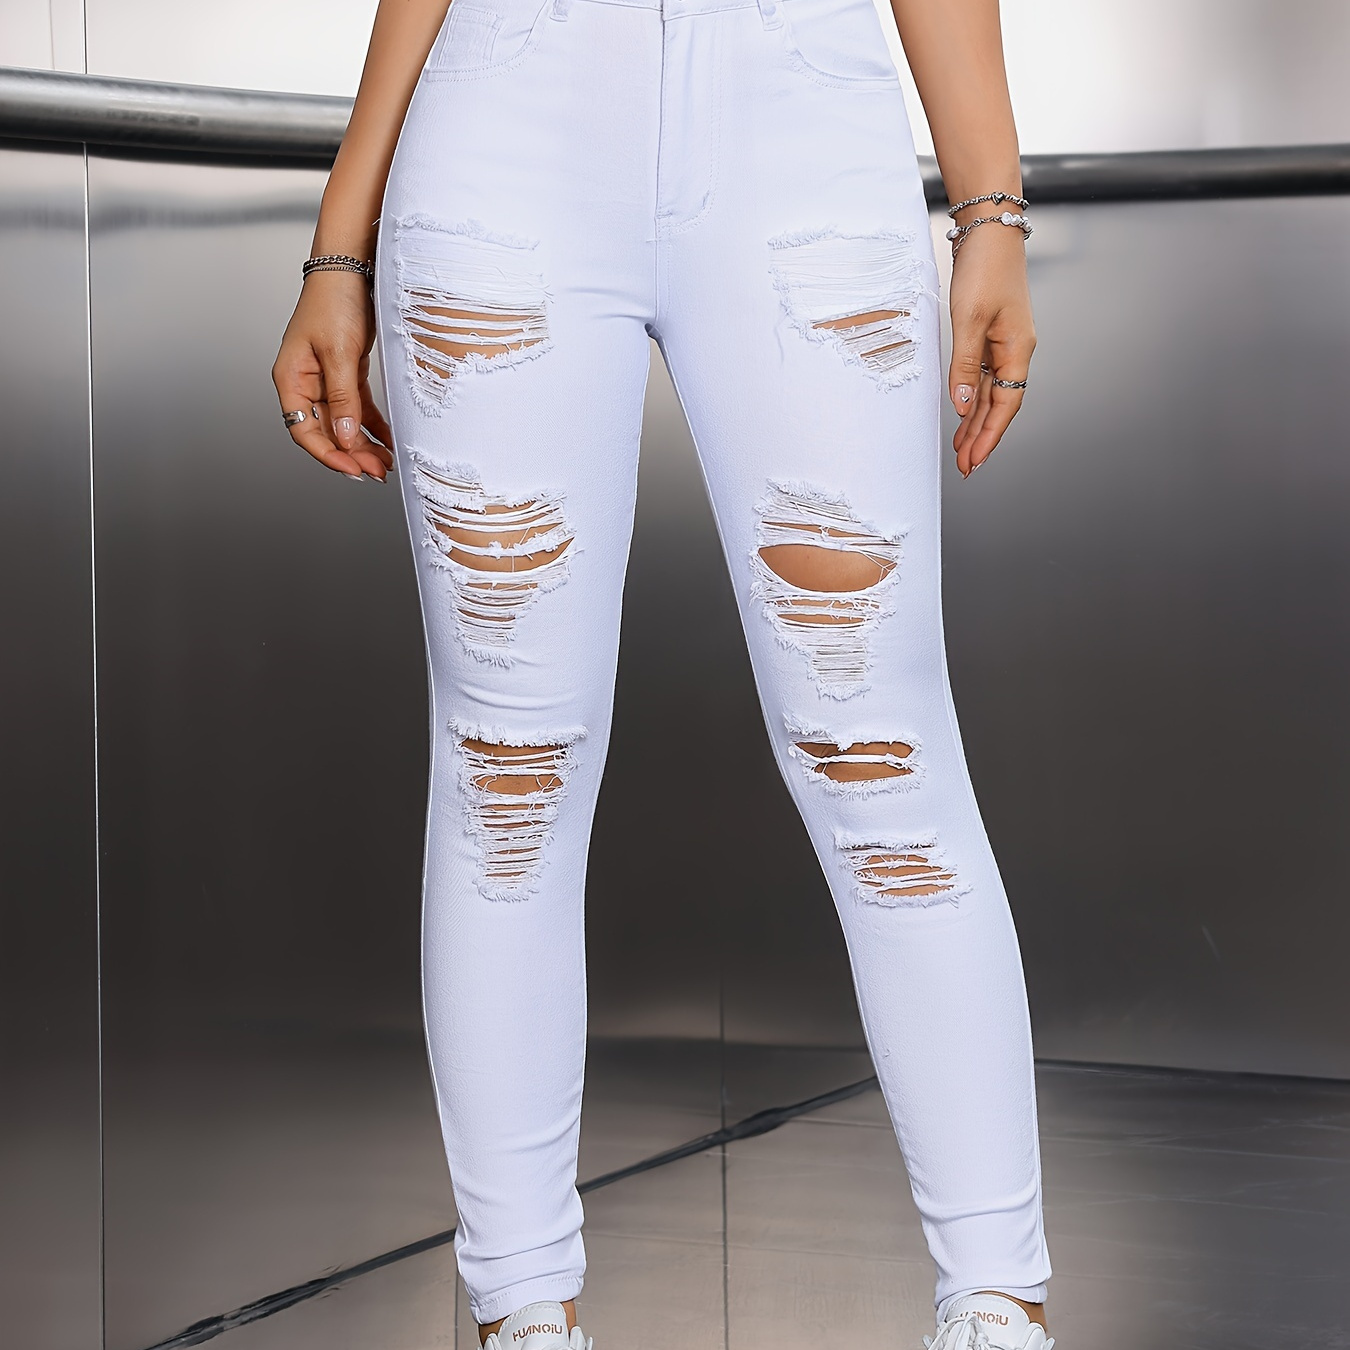 

Women's Fashion Ripped Jeans, Street Style, Skinny Fit, High Waist, Stretchy Plain Denim, Casual Distressed White Pants - Perfect For Fall & Winter